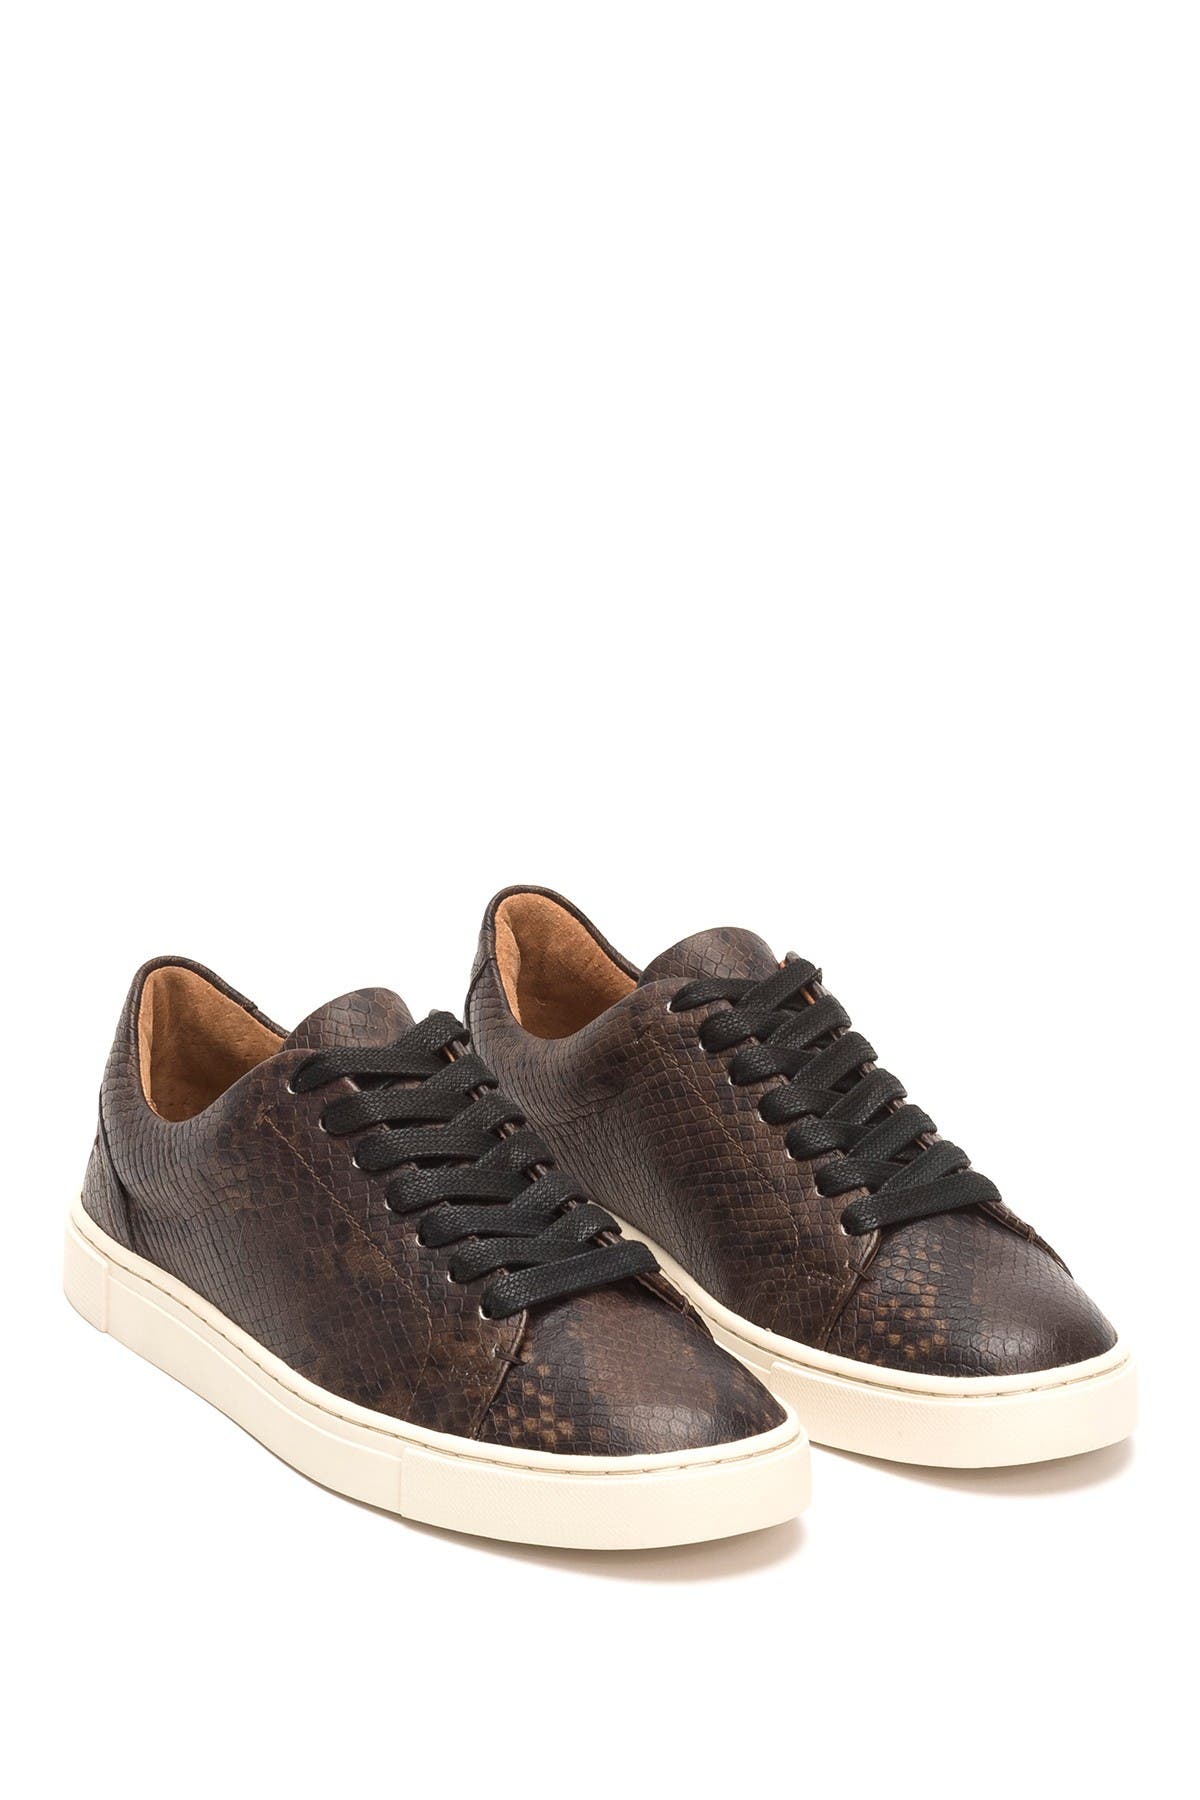 Frye | Snake Embossed Leather Ivy Low 